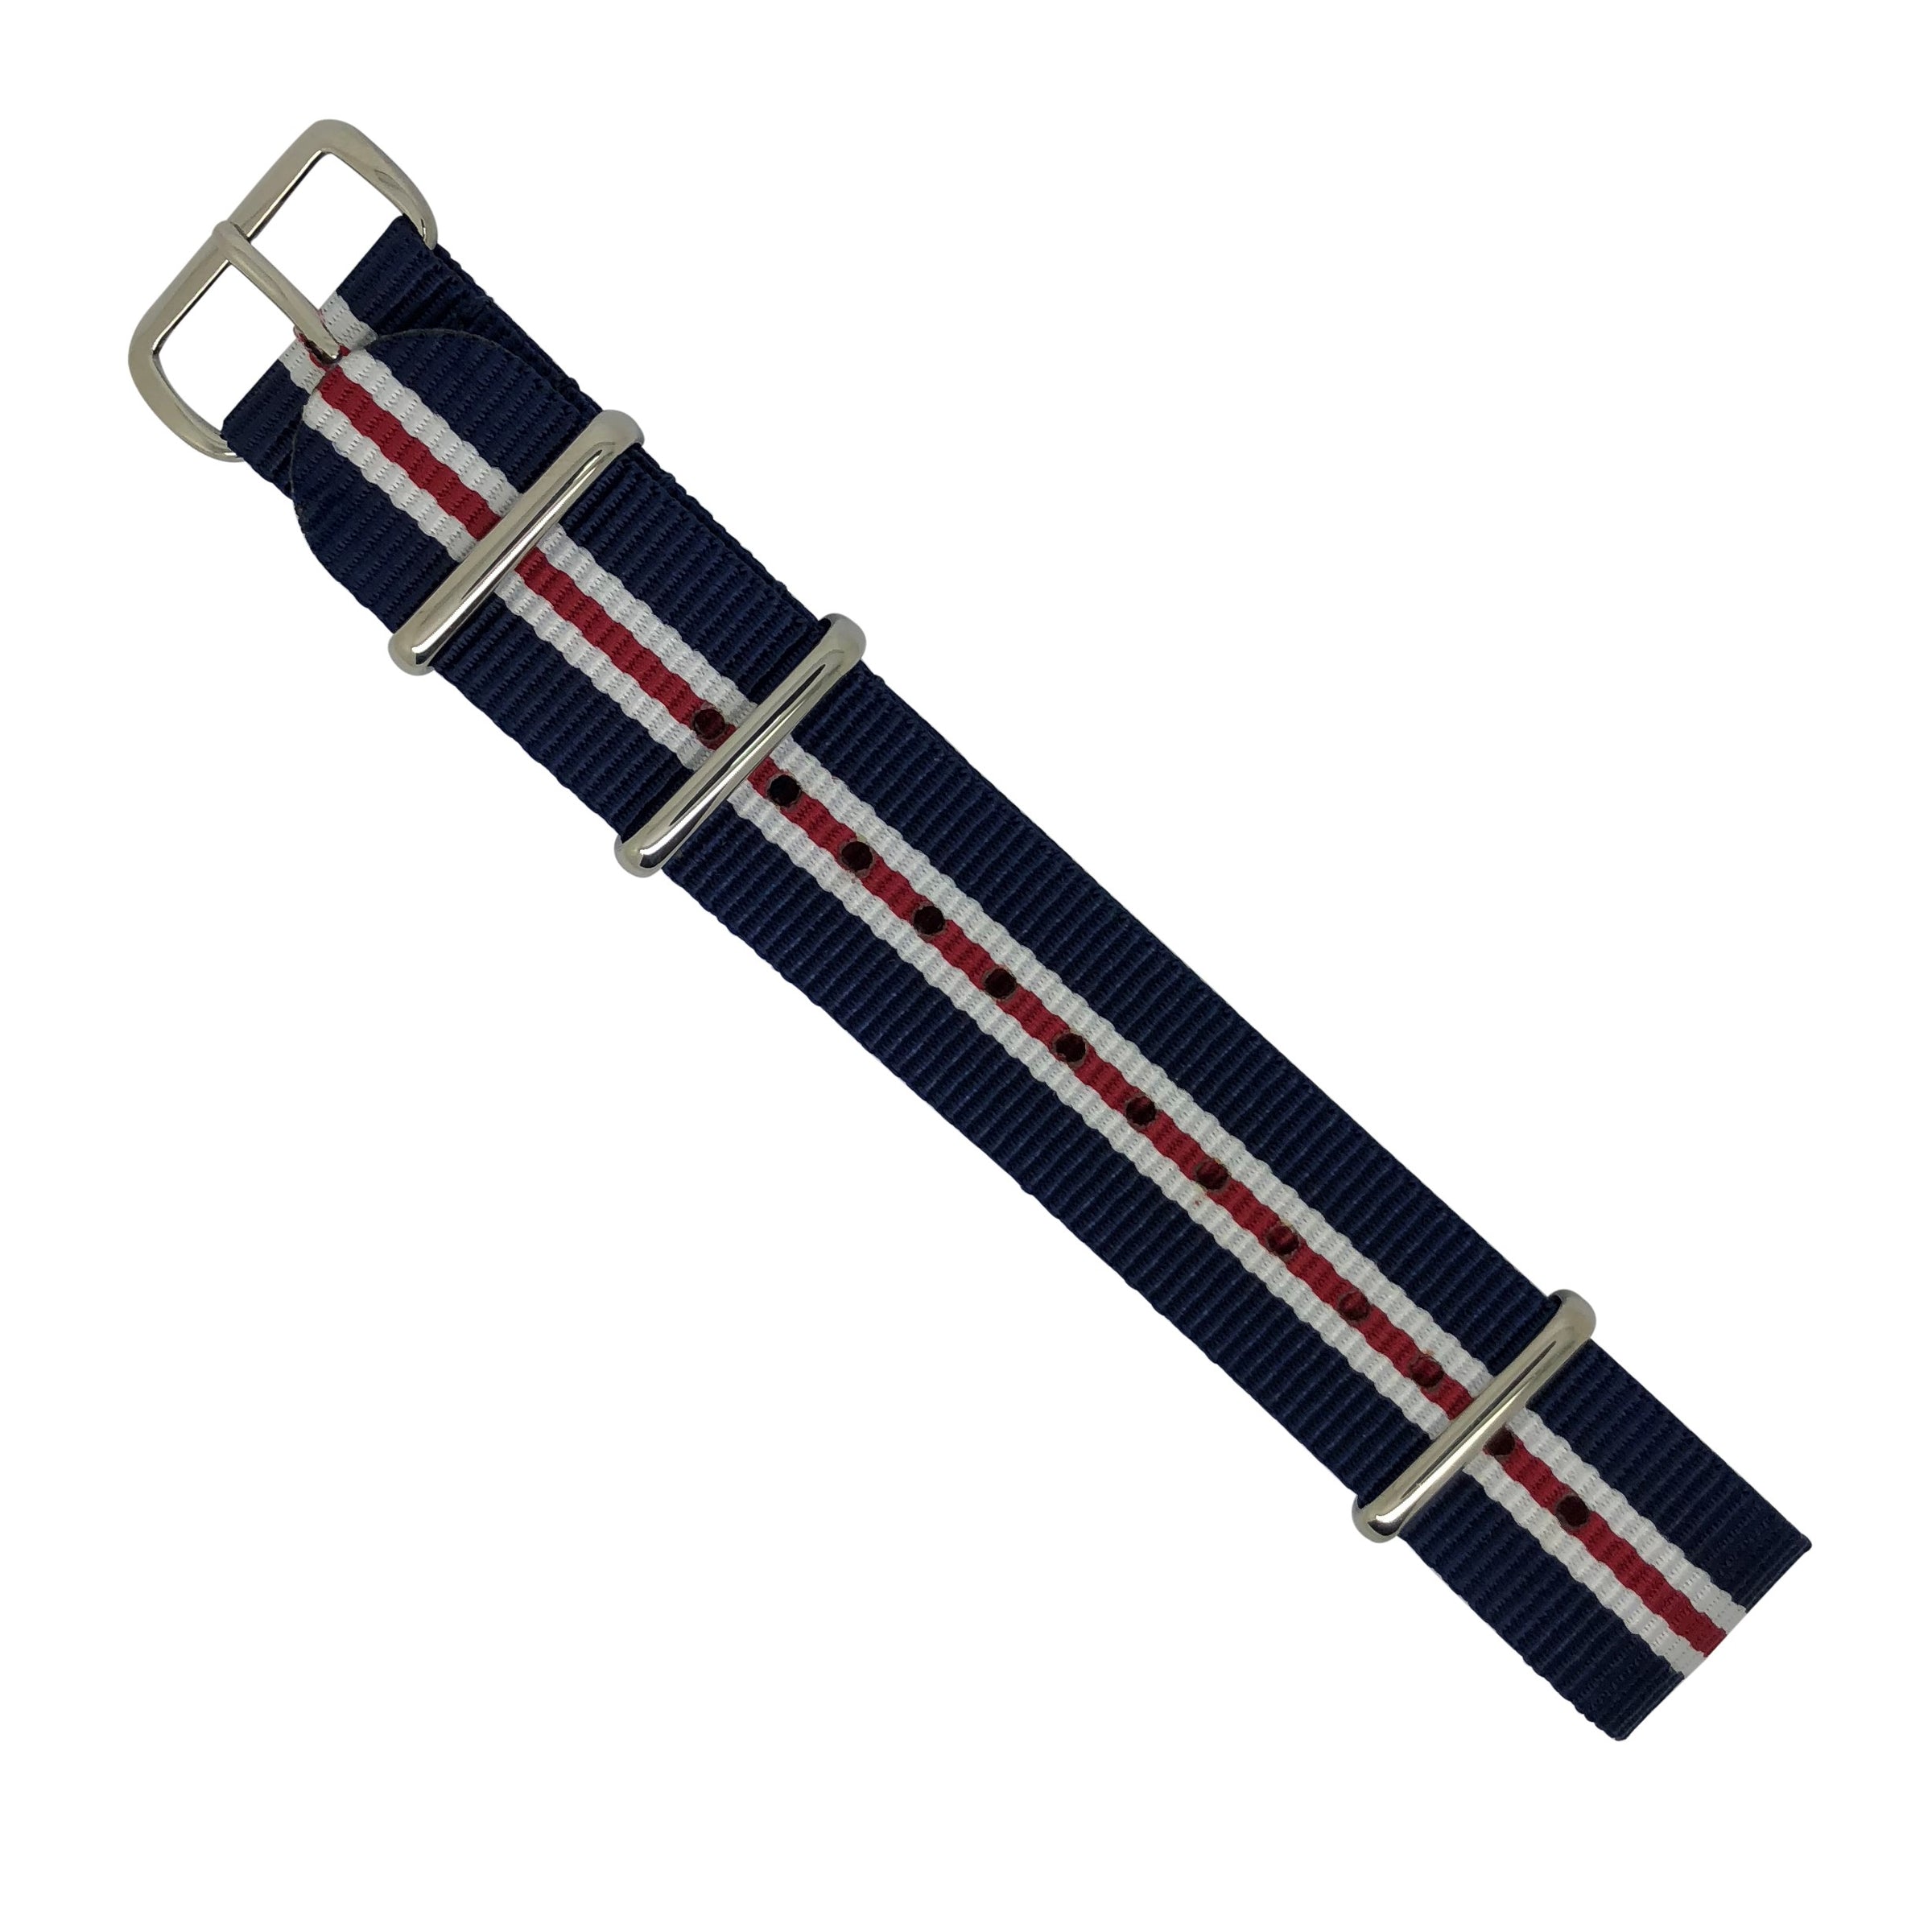 Premium Nato Strap in Navy White Red (Crest) with Polished Silver Buckle (20mm) - Nomad watch Works